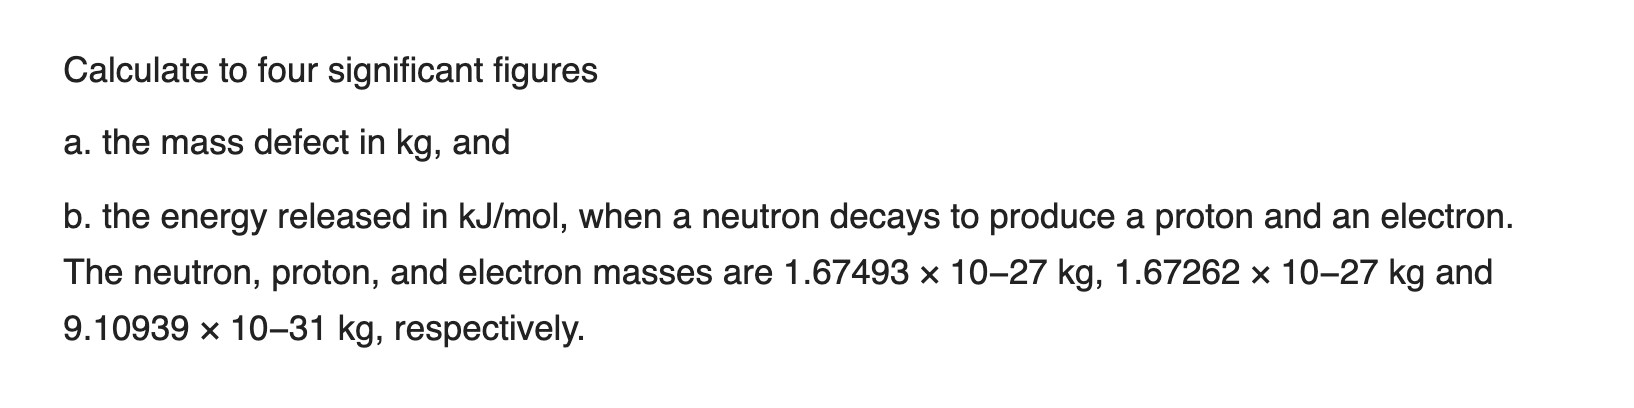 Calculate to four significant figures
a. the mass defect in kg, and
b. the energy released in kJ/mol, when a neutron decays to produce a proton and an electron.
The neutron, proton, and electron masses are 1.67493 x 10–27 kg, 1.67262 × 10–27 kg and
9.10939 x 10–31 kg, respectively.
